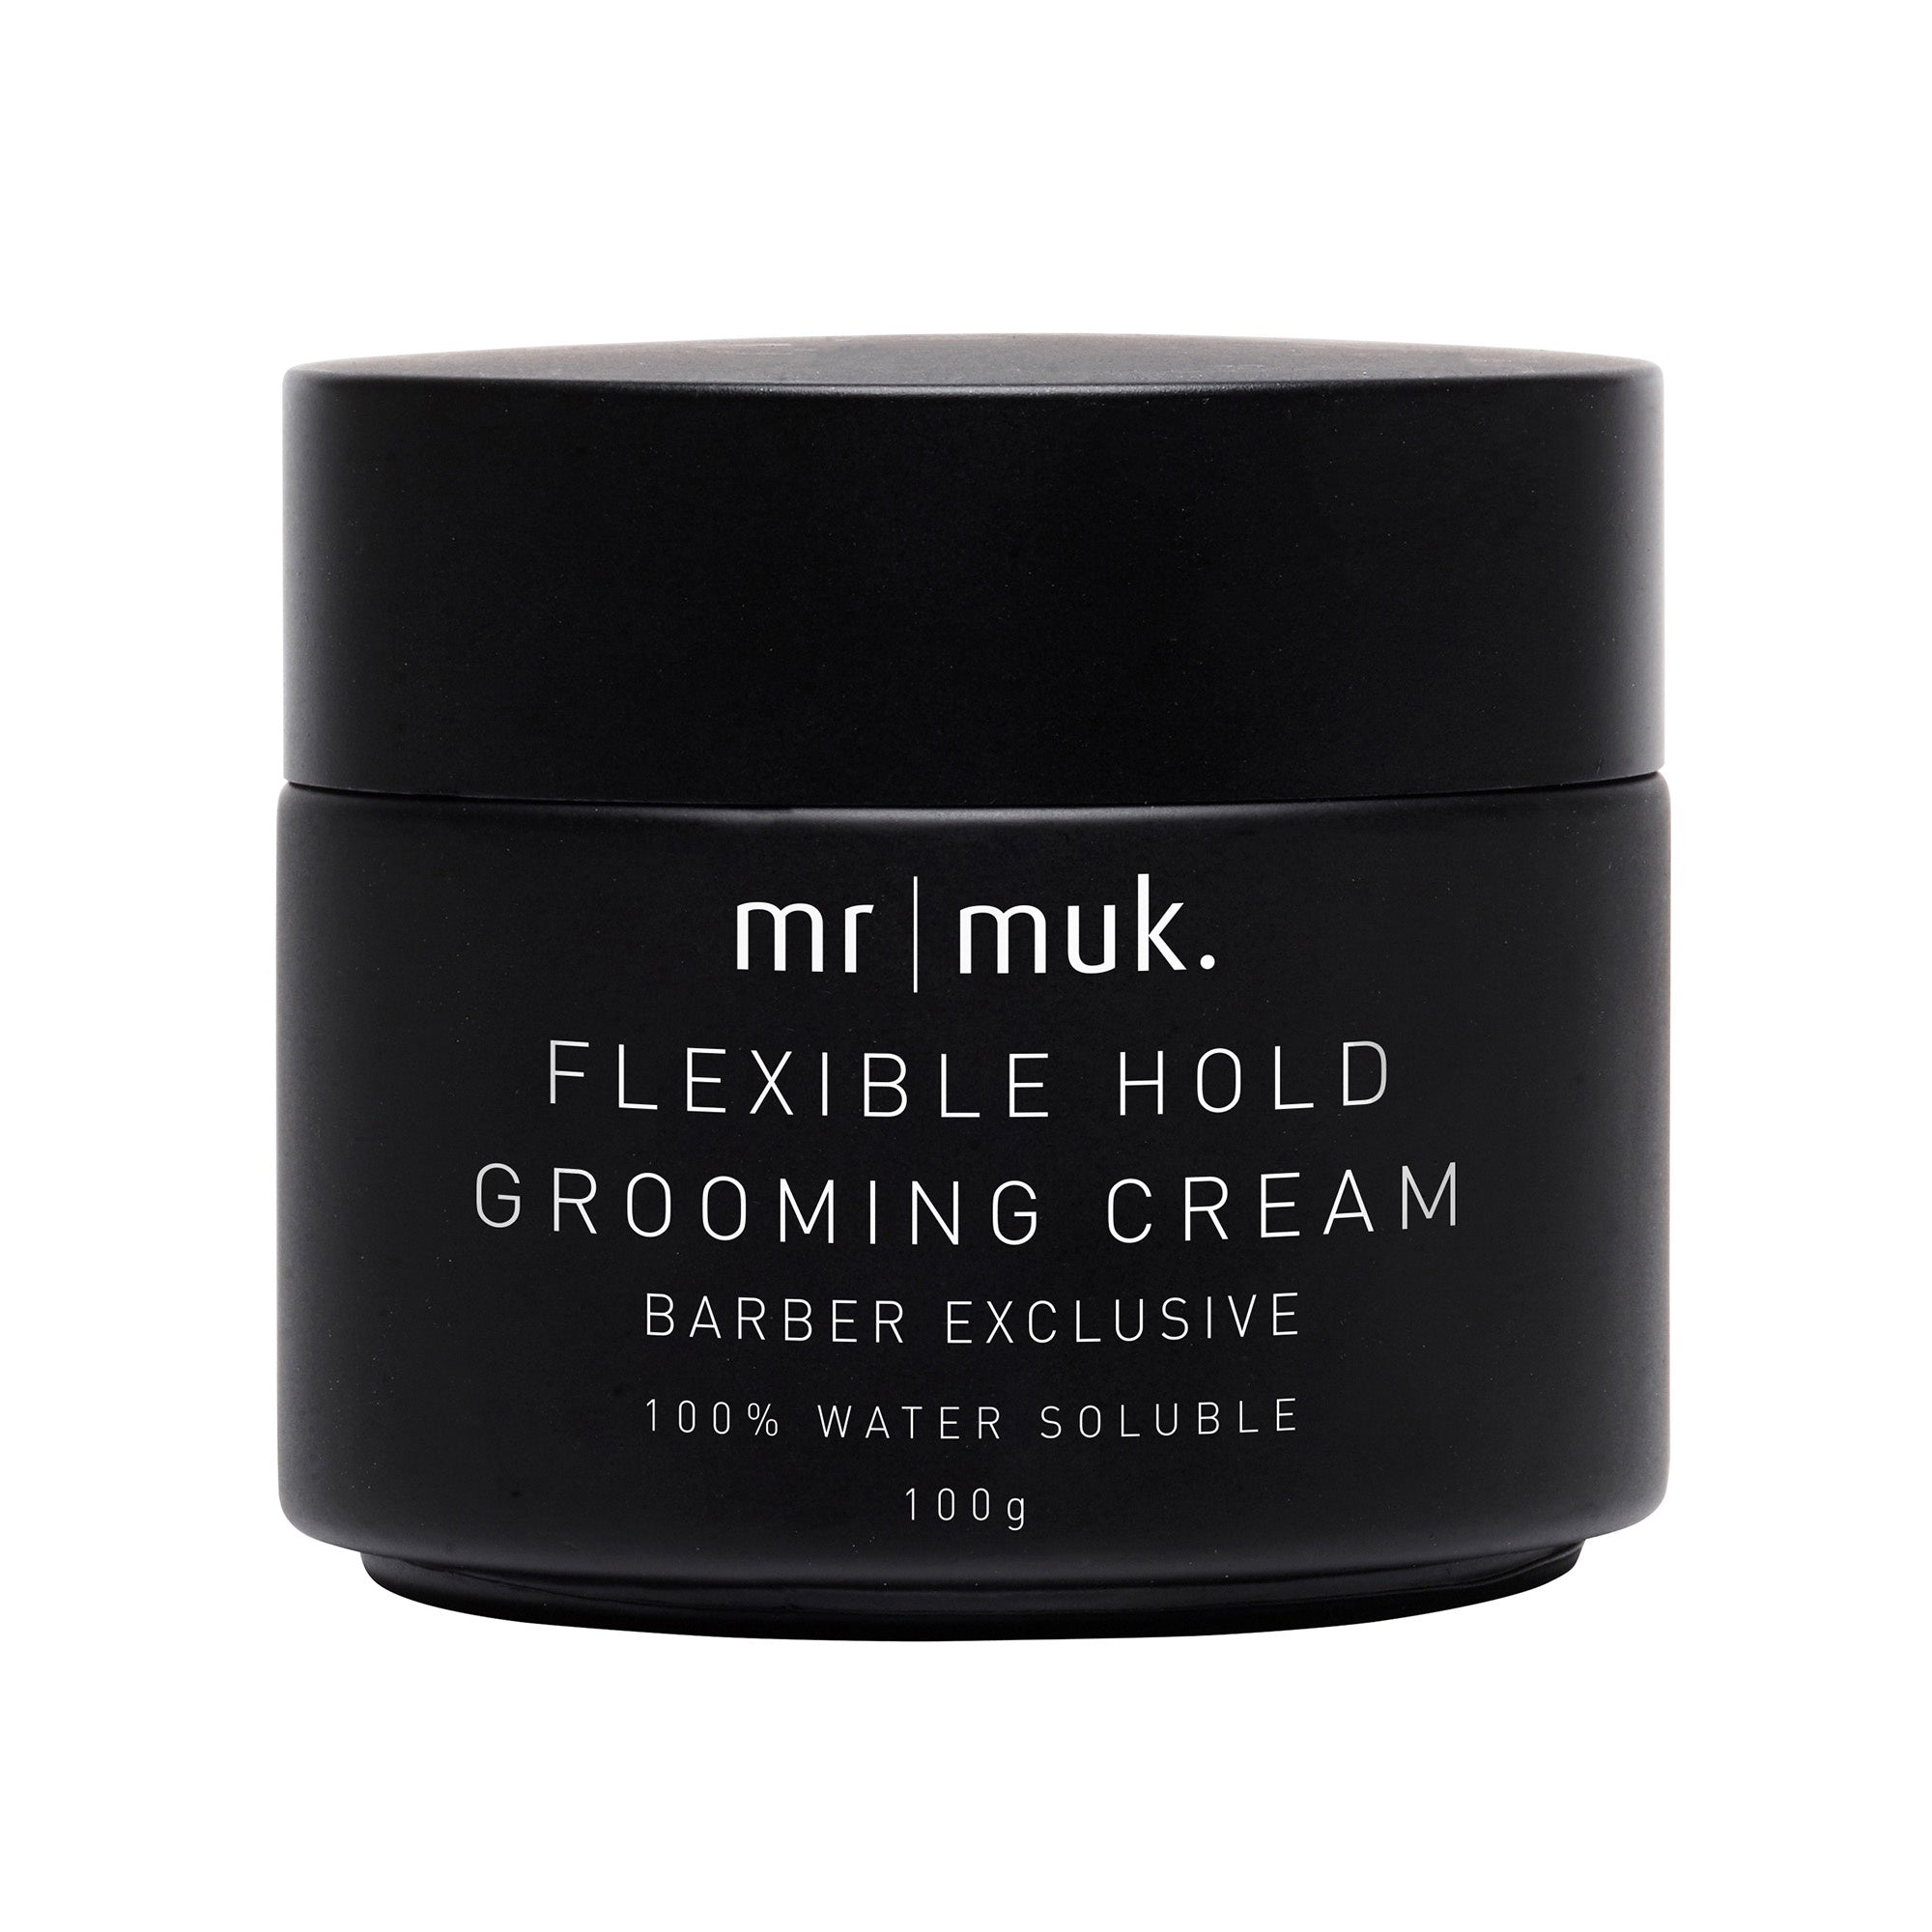 Mr Muk Flexible Hold Grooming Cream is water soluble and spreads easily on the hair for curl definition and natural shine.